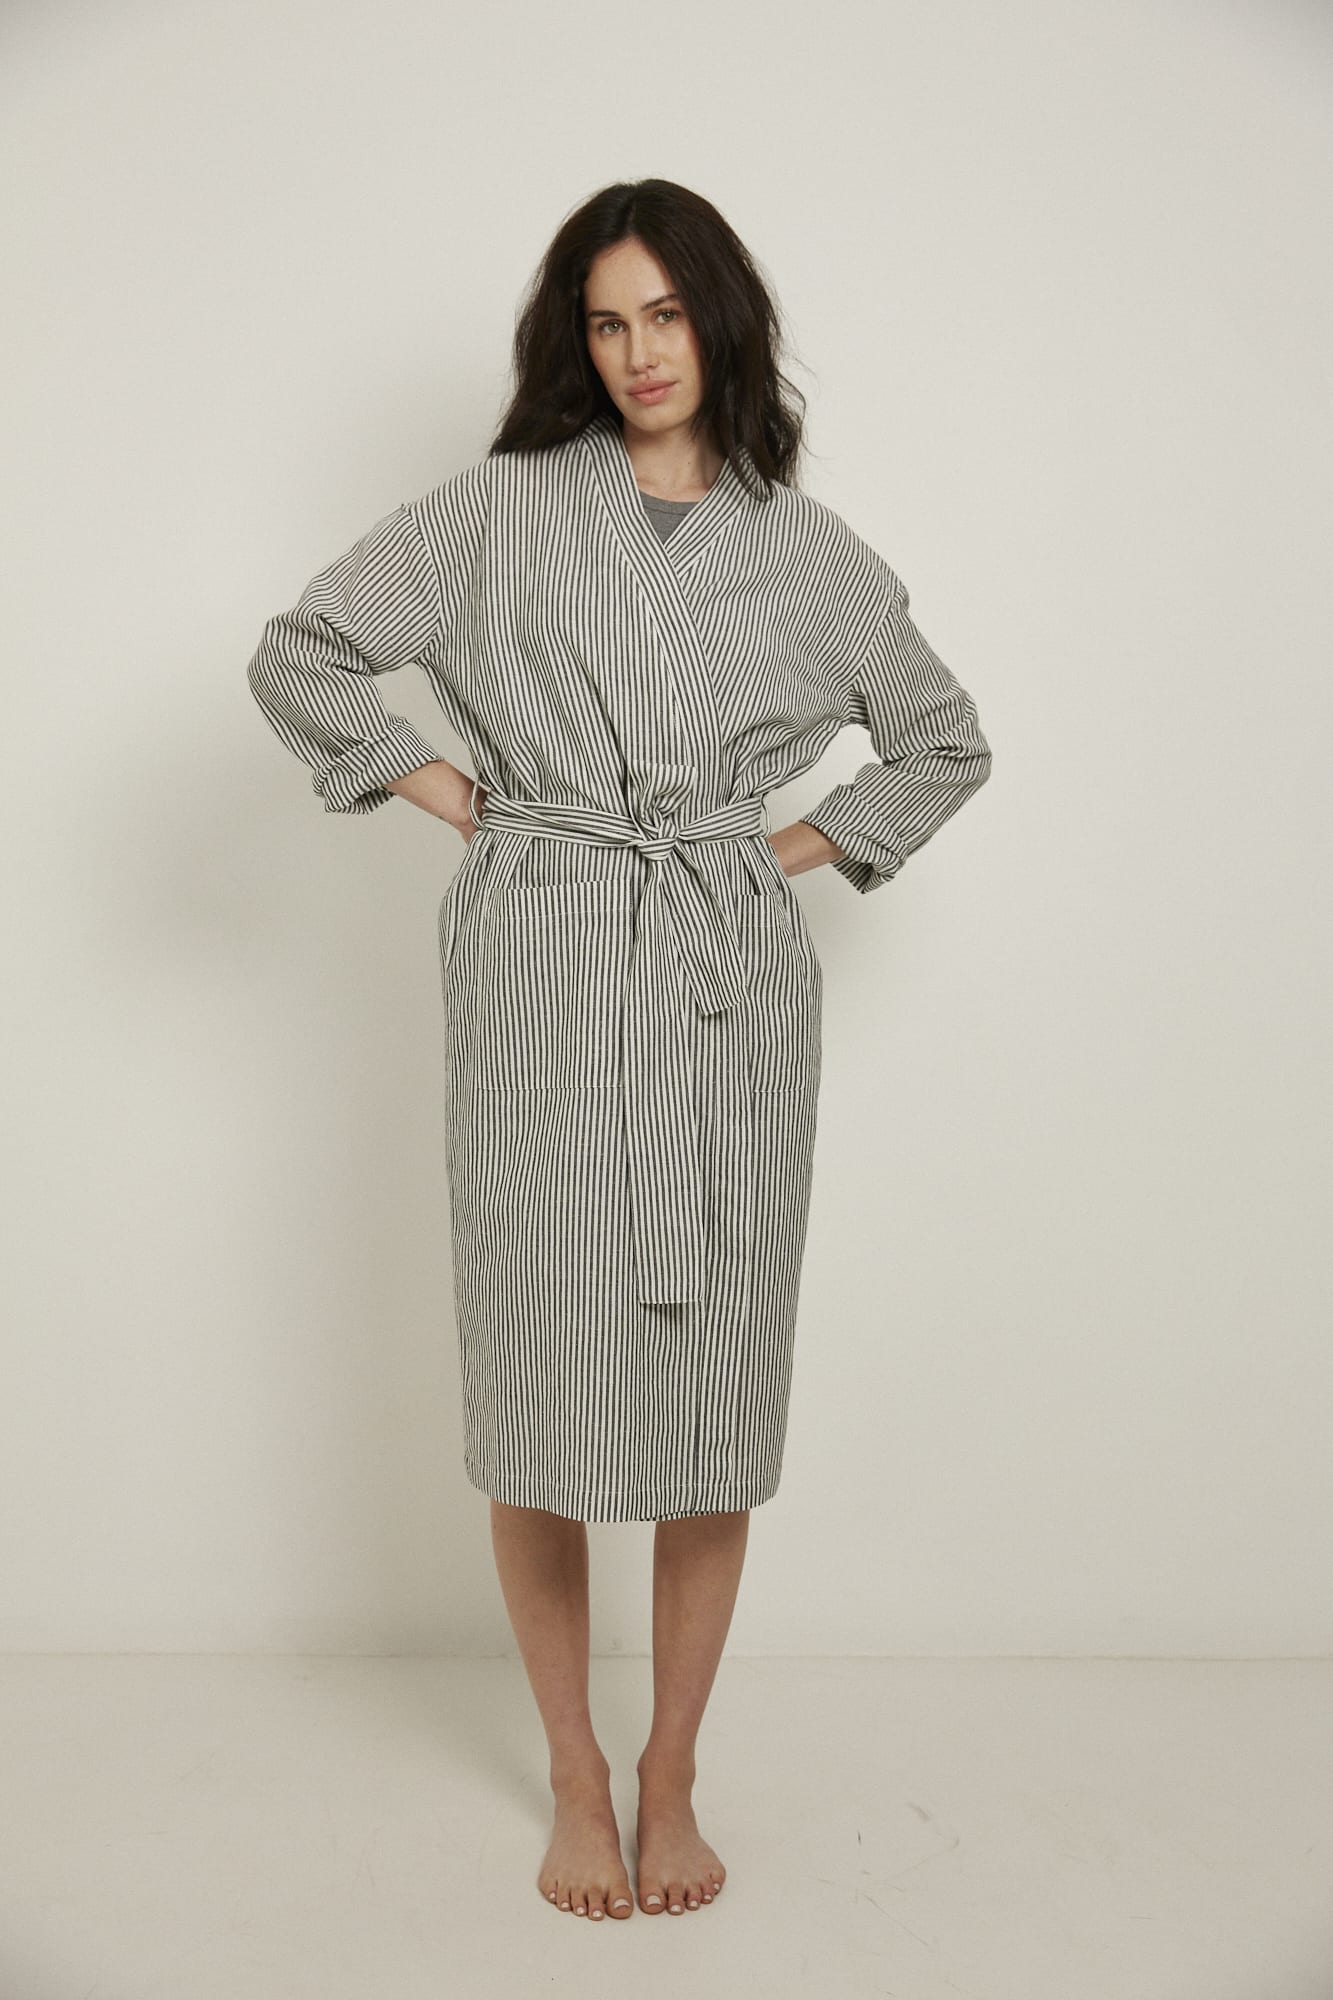 Women’s Robe.  Made from an organic cotton and linen blend, in a black and white stripe.  This robe has a relaxed-fit with a dropped shoulder, front patch pockets and a tie belt. Finished with French seams.